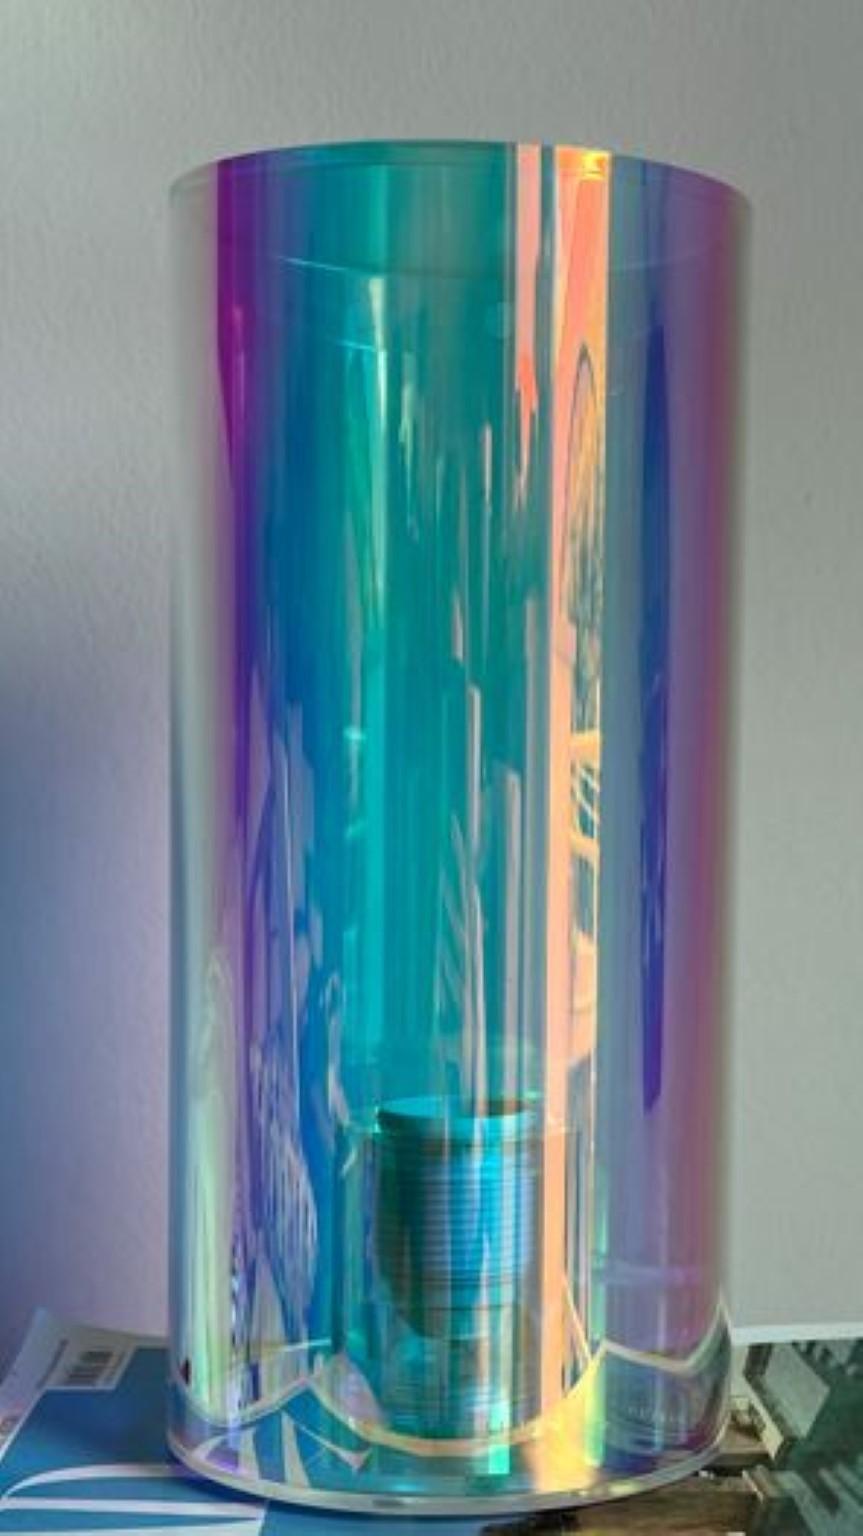 Cylinder Holographic table lamp by Brajak Vitberg
Dimensions: W 14 x D 14 x H 30 cm
Materials: plexiglass + dichroic film.

Bijelic and Brajak are two architects from Ljubljana, Slovenia.
They are striving to design craft elements and make them